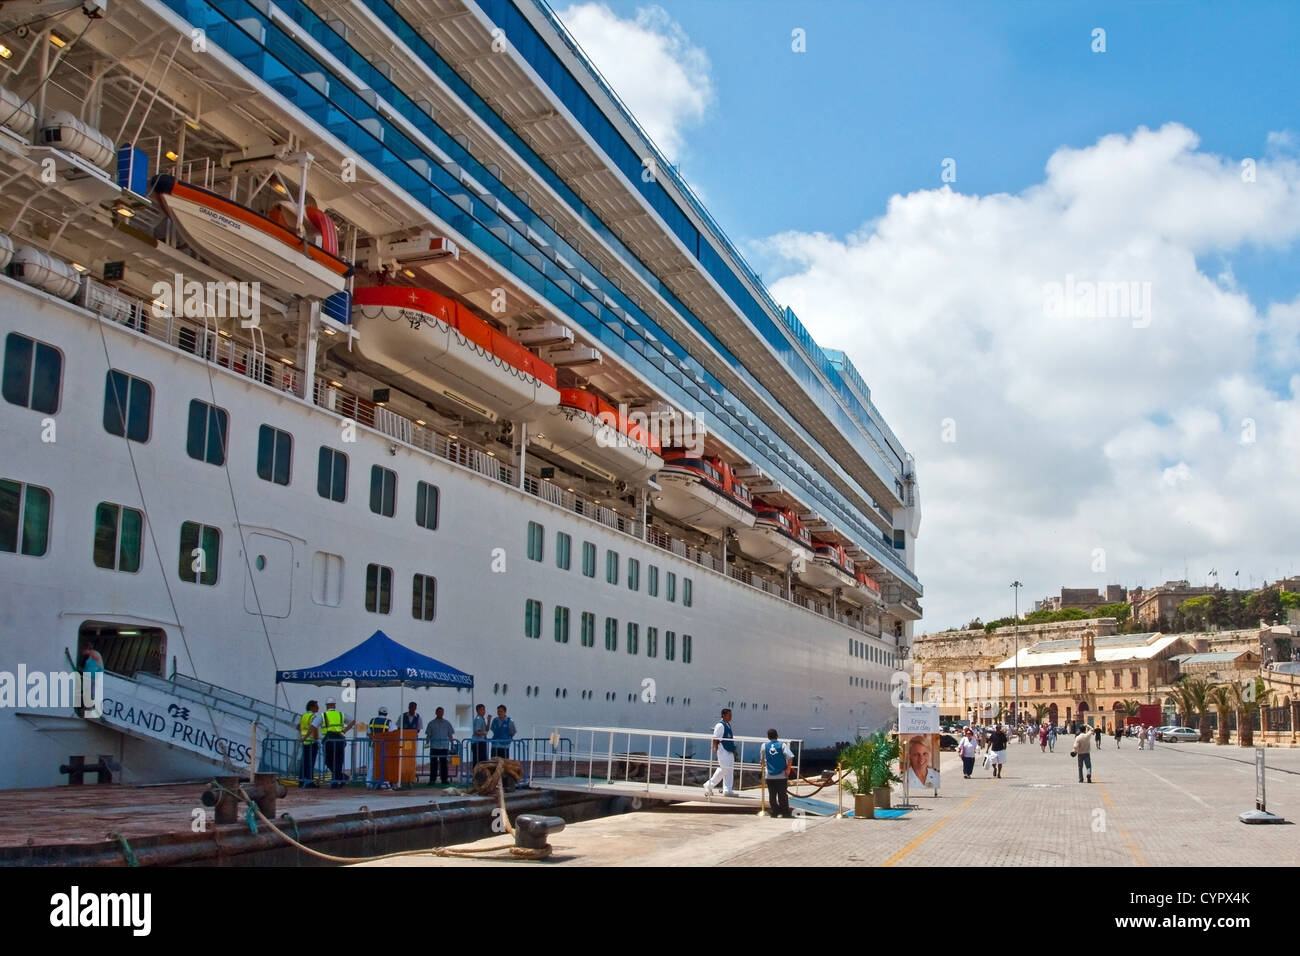 Cruise liner Grand Princess at the quayside in Valetta, Malta Stock Photo